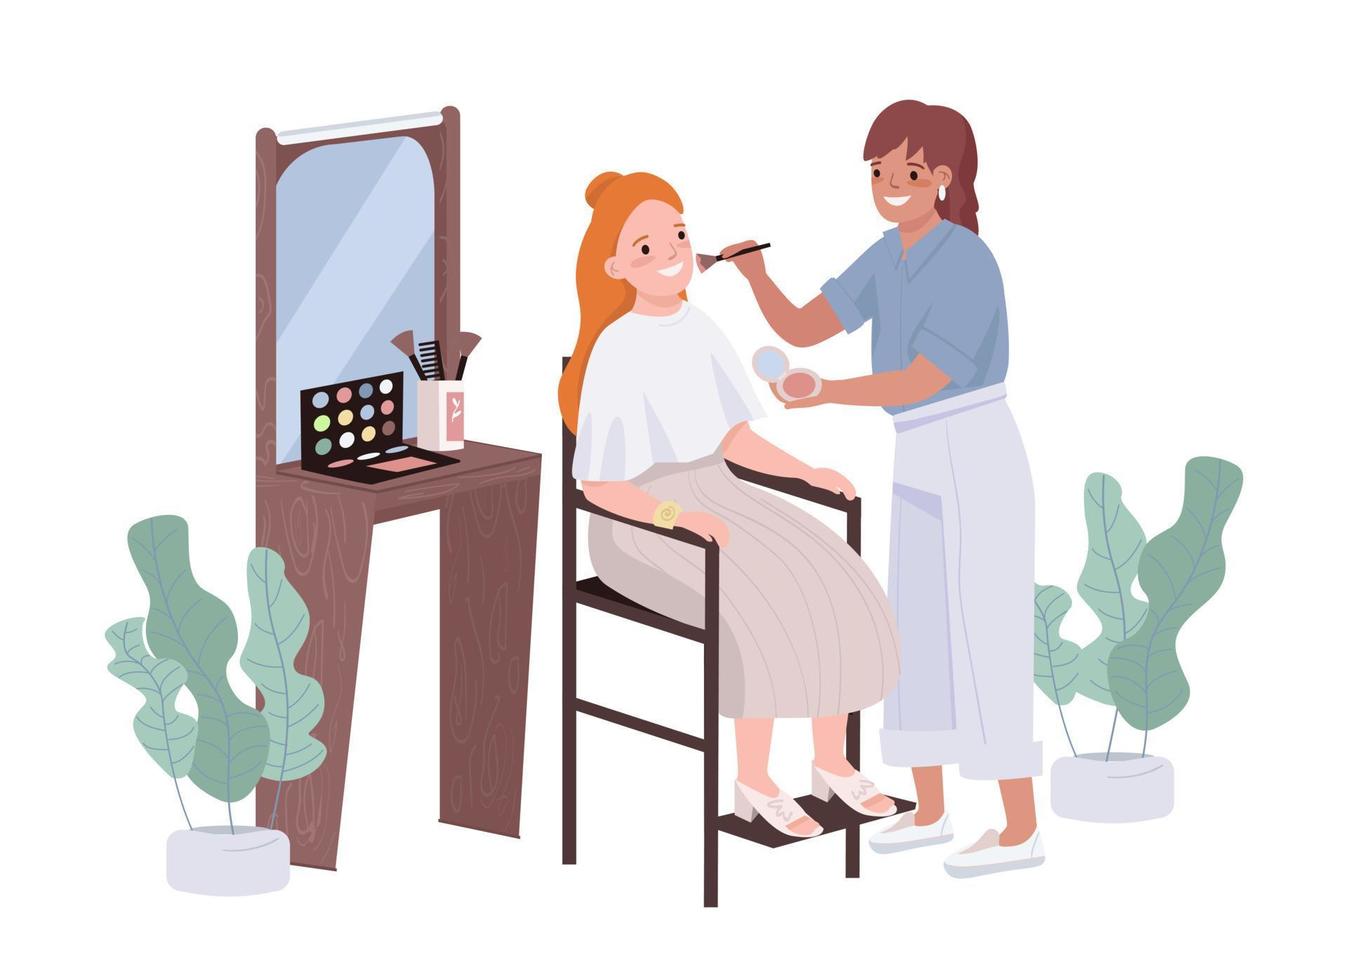 Makeup artist service 2D vector isolated illustration. Beauty salon flat characters on cartoon background. Facial cosmetics application colourful editable scene for mobile, website, presentation